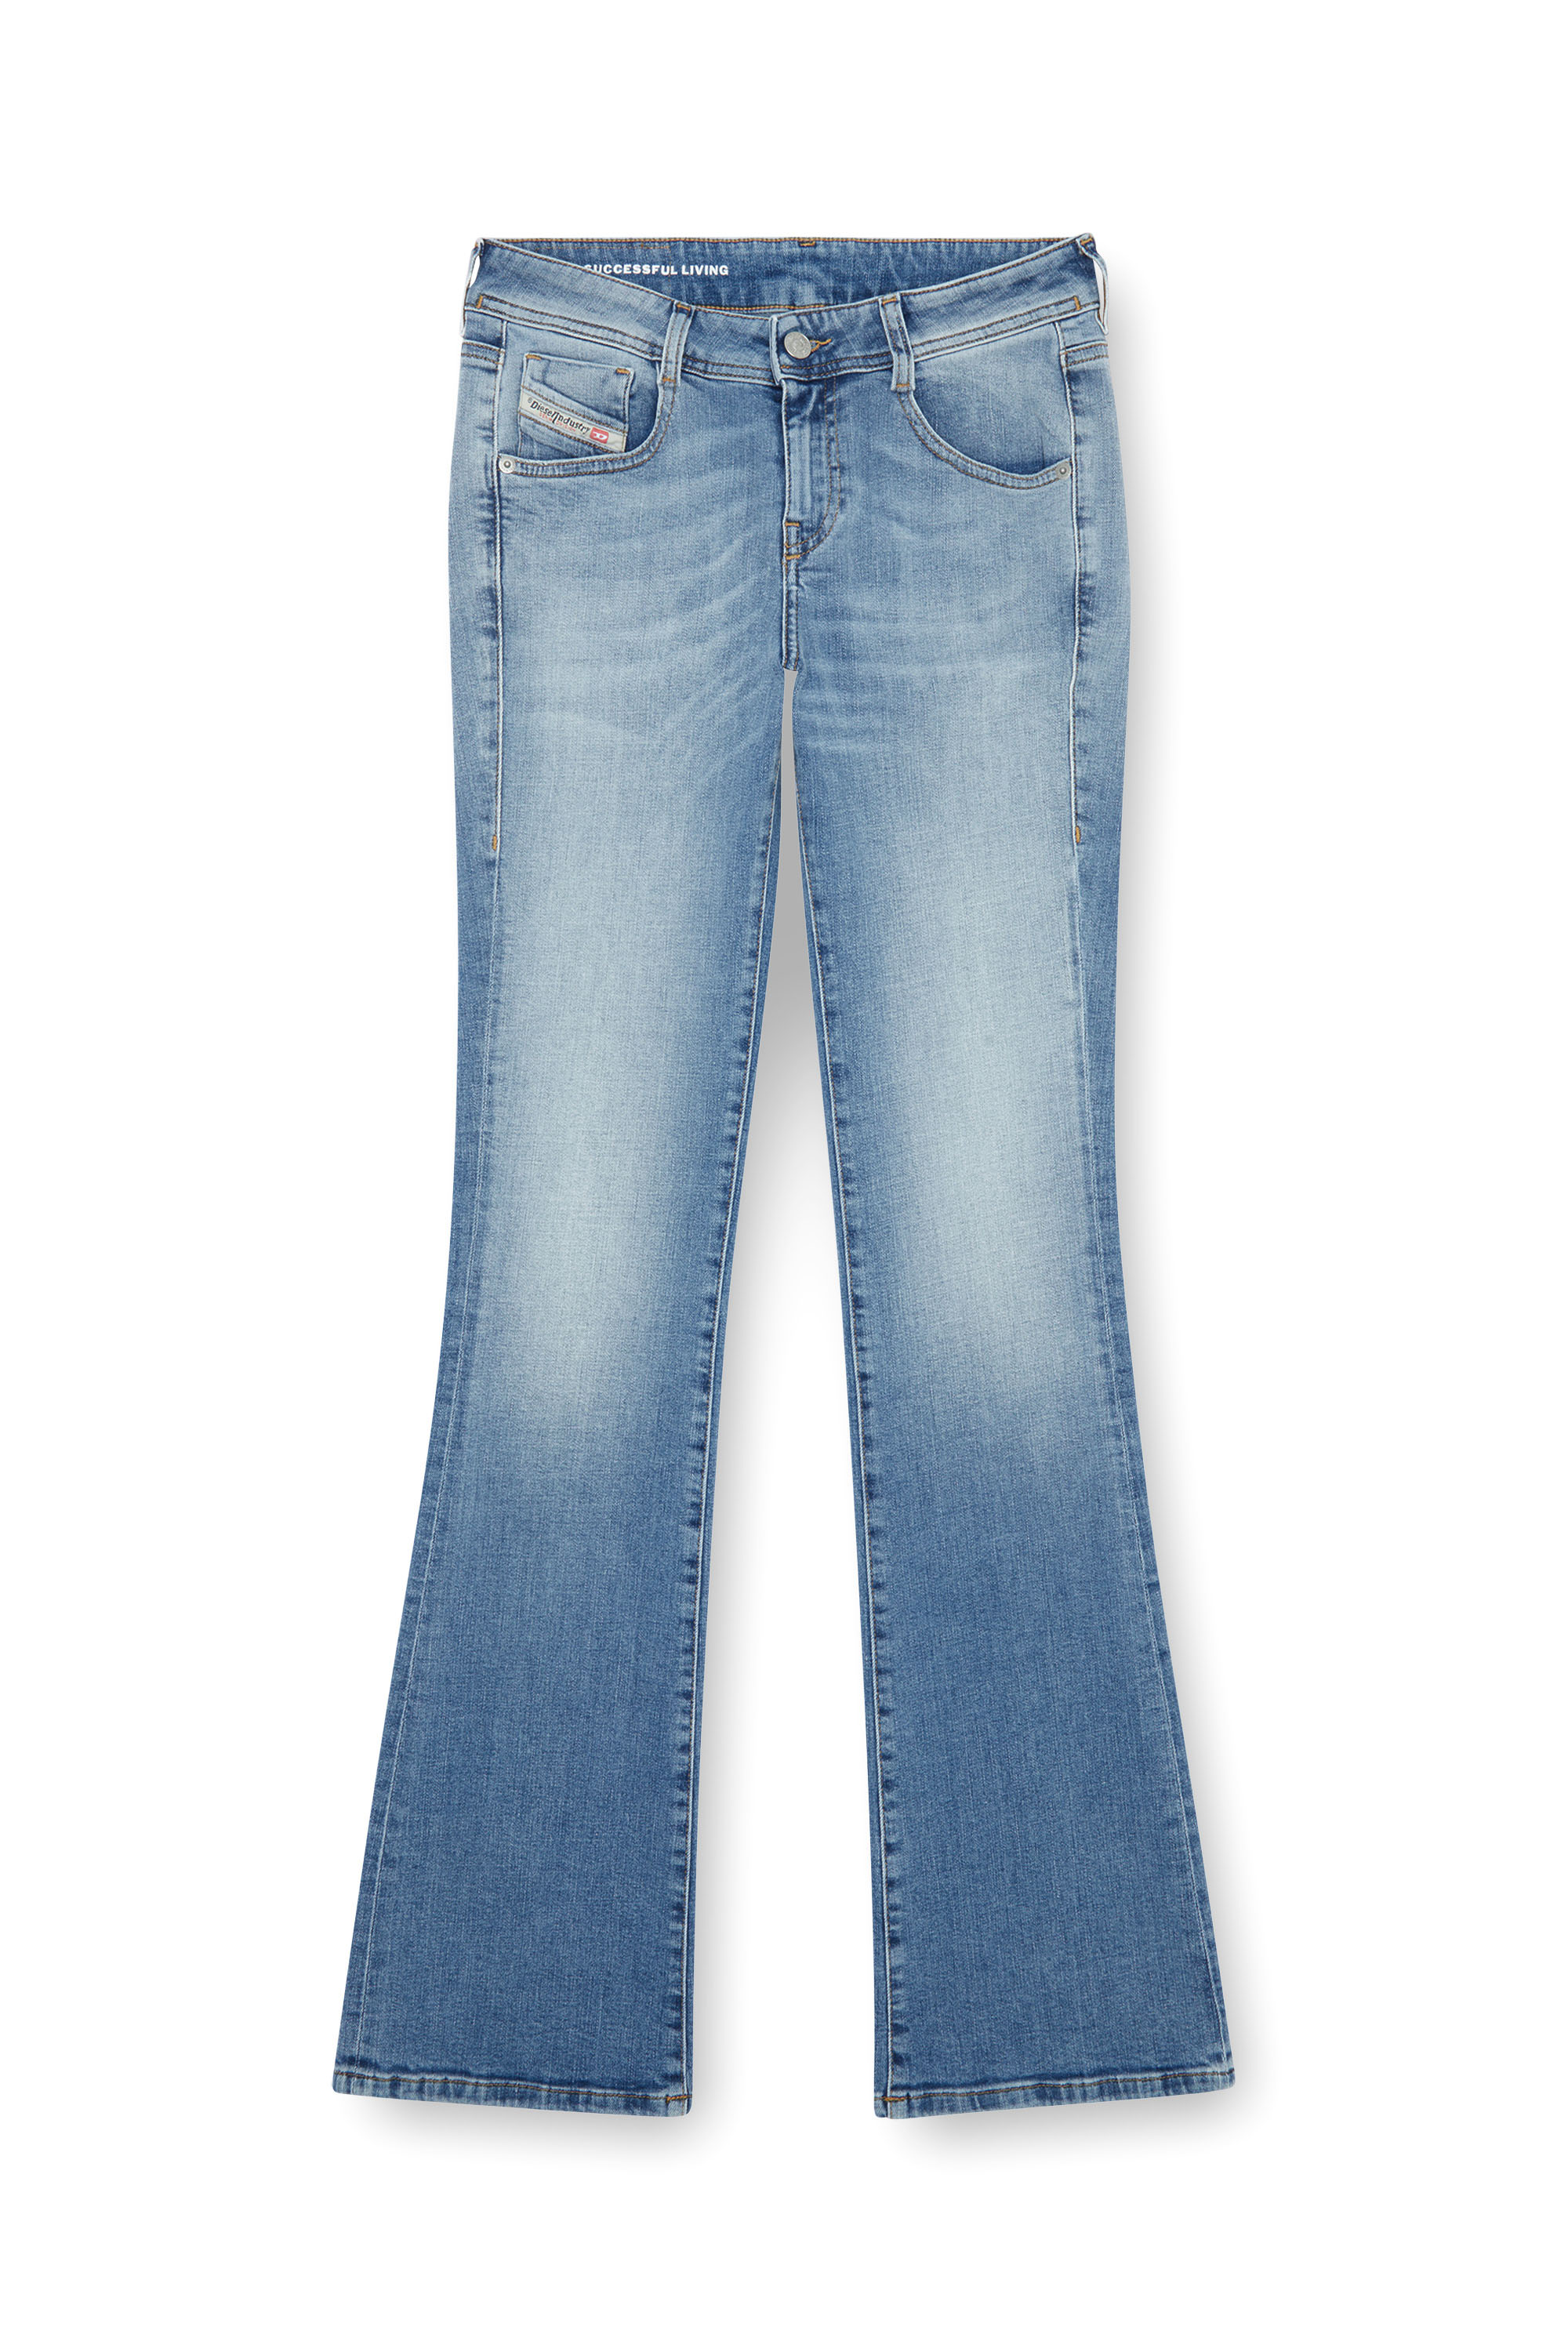 Diesel - Bootcut and Flare Jeans 1969 D-Ebbey 09K06, Mujer Bootcut y Flare Jeans - 1969 D-Ebbey in Azul marino - Image 5